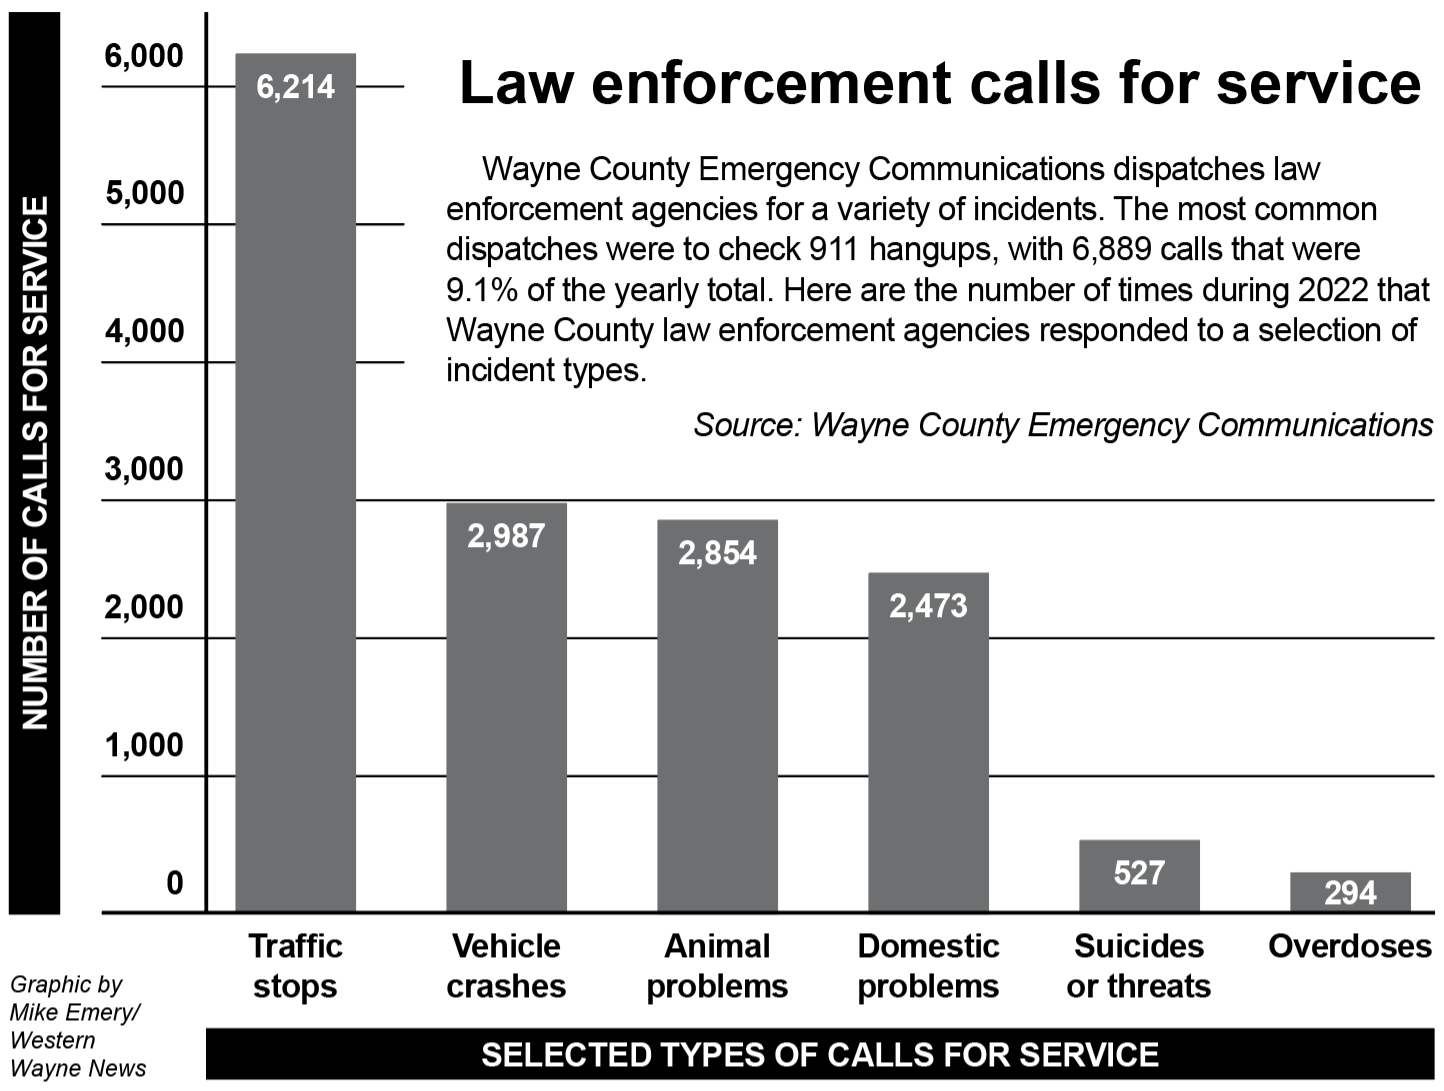 Wayne County Emergency Communications dispatches law enforcement agencies for a variety of incidents. The most common dispatches were to check 911 hangups, with 6,889 calls that were 9.1% of the yearly total. This image shows the number of times during 2022 that Wayne County law enforcement agencies responded to a selection of incident types.